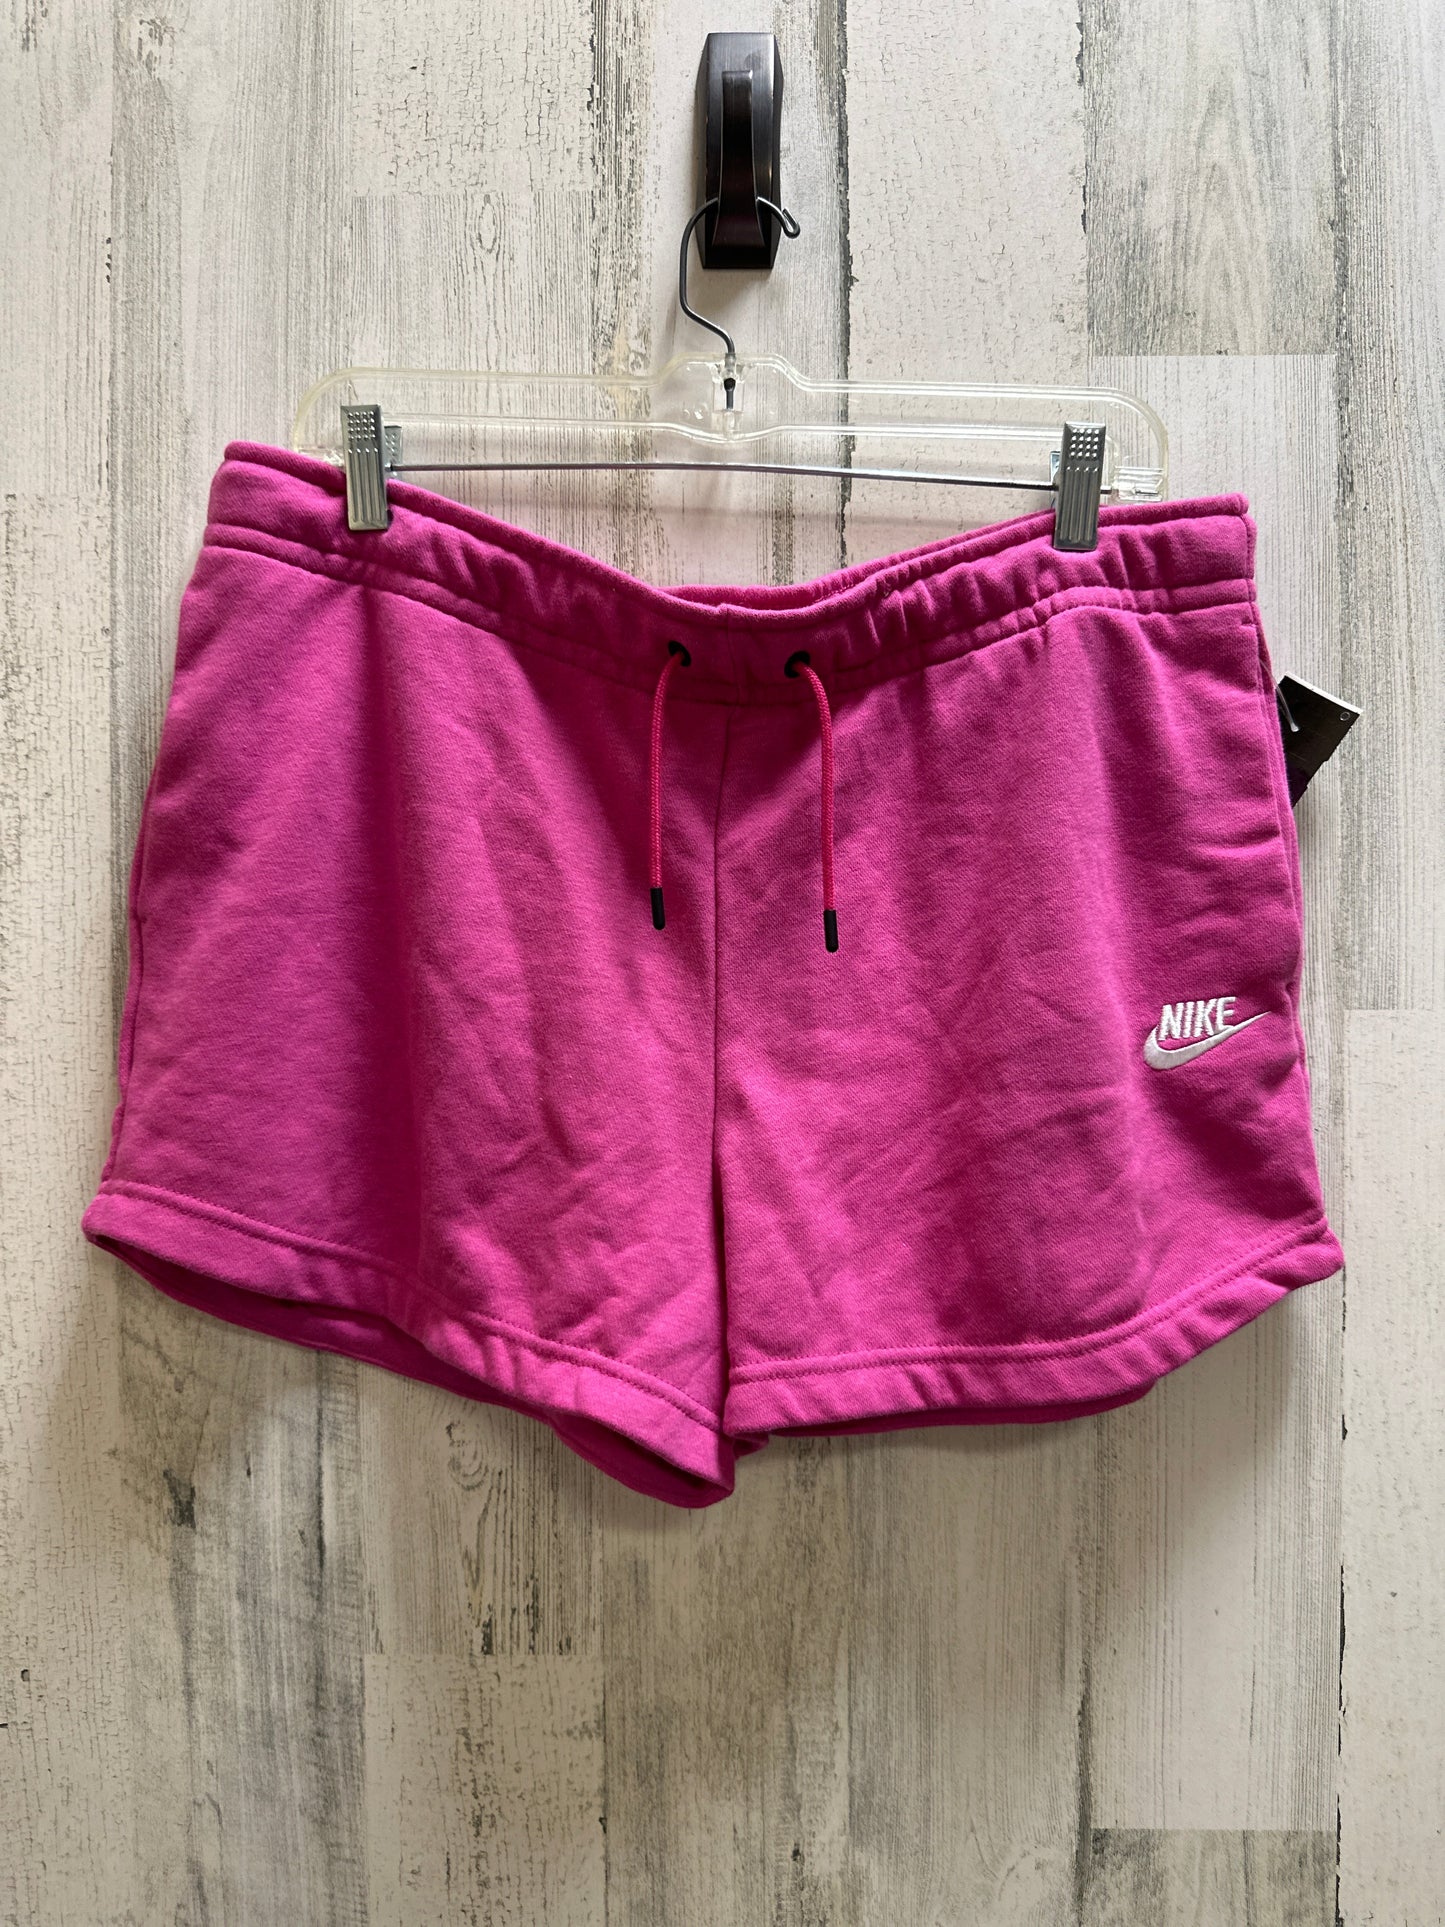 Pink Athletic Shorts Nike Apparel, Size L